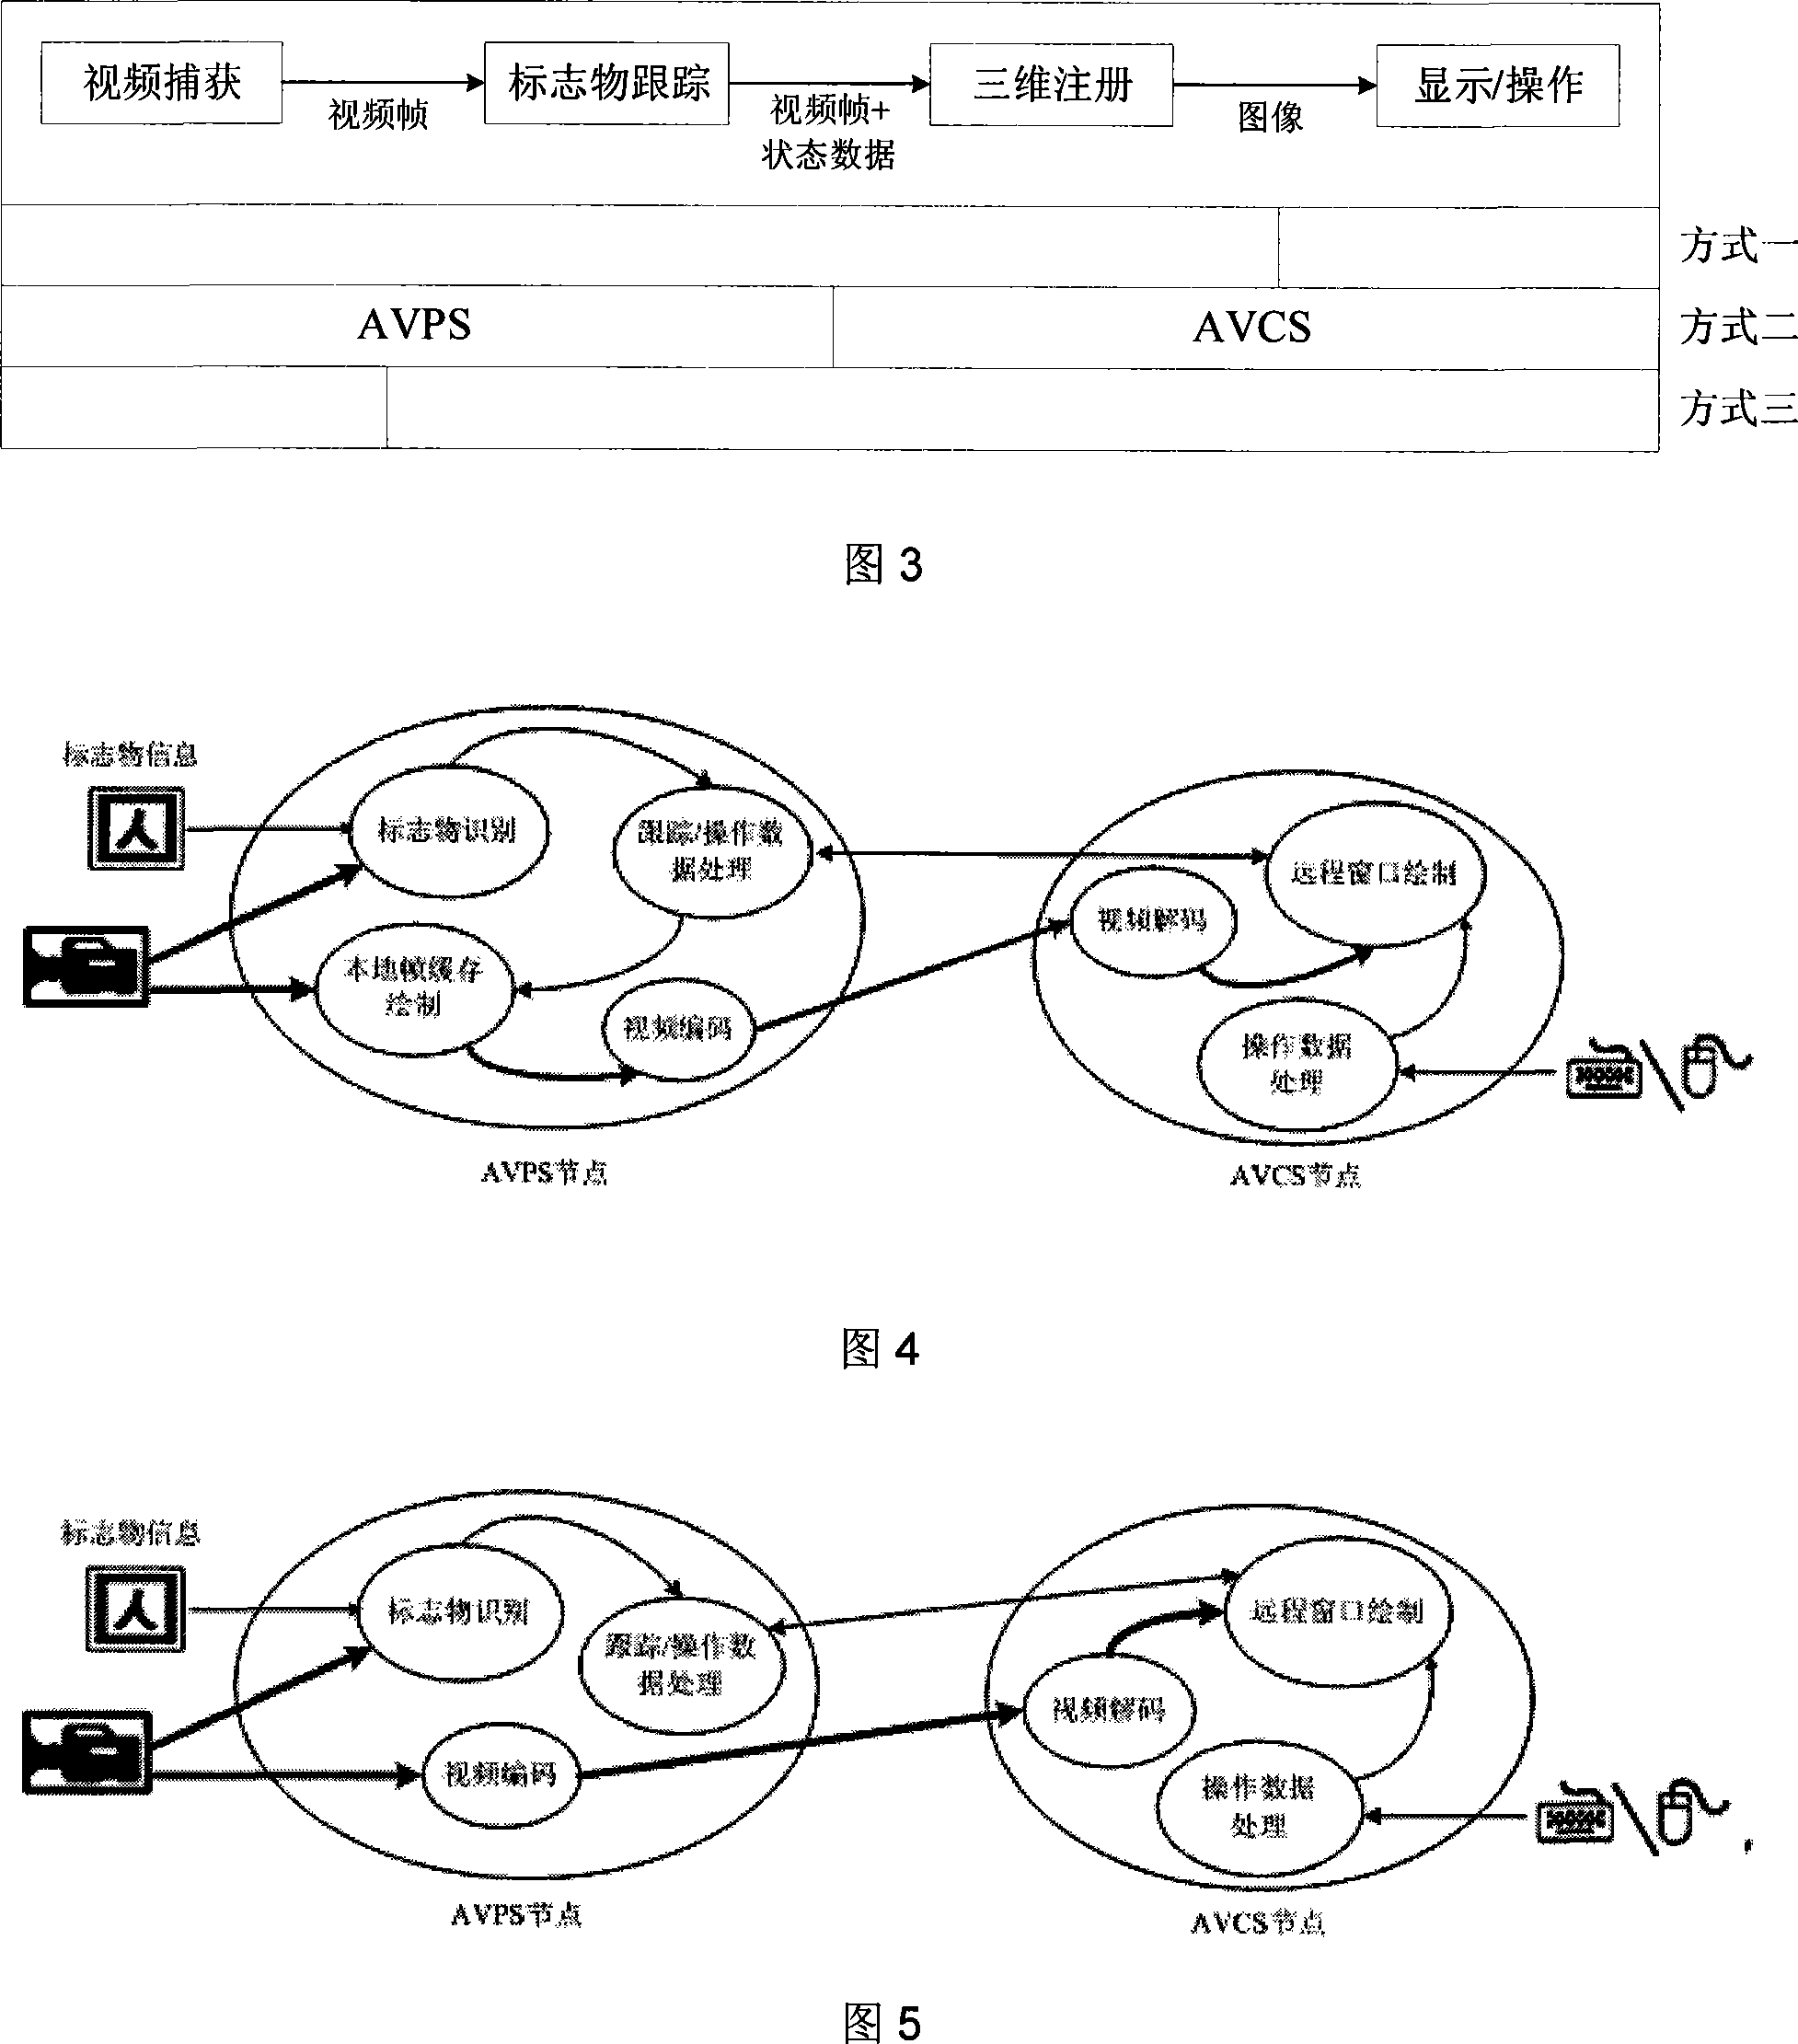 Method for implementing enhancement type video service mode of access gridding